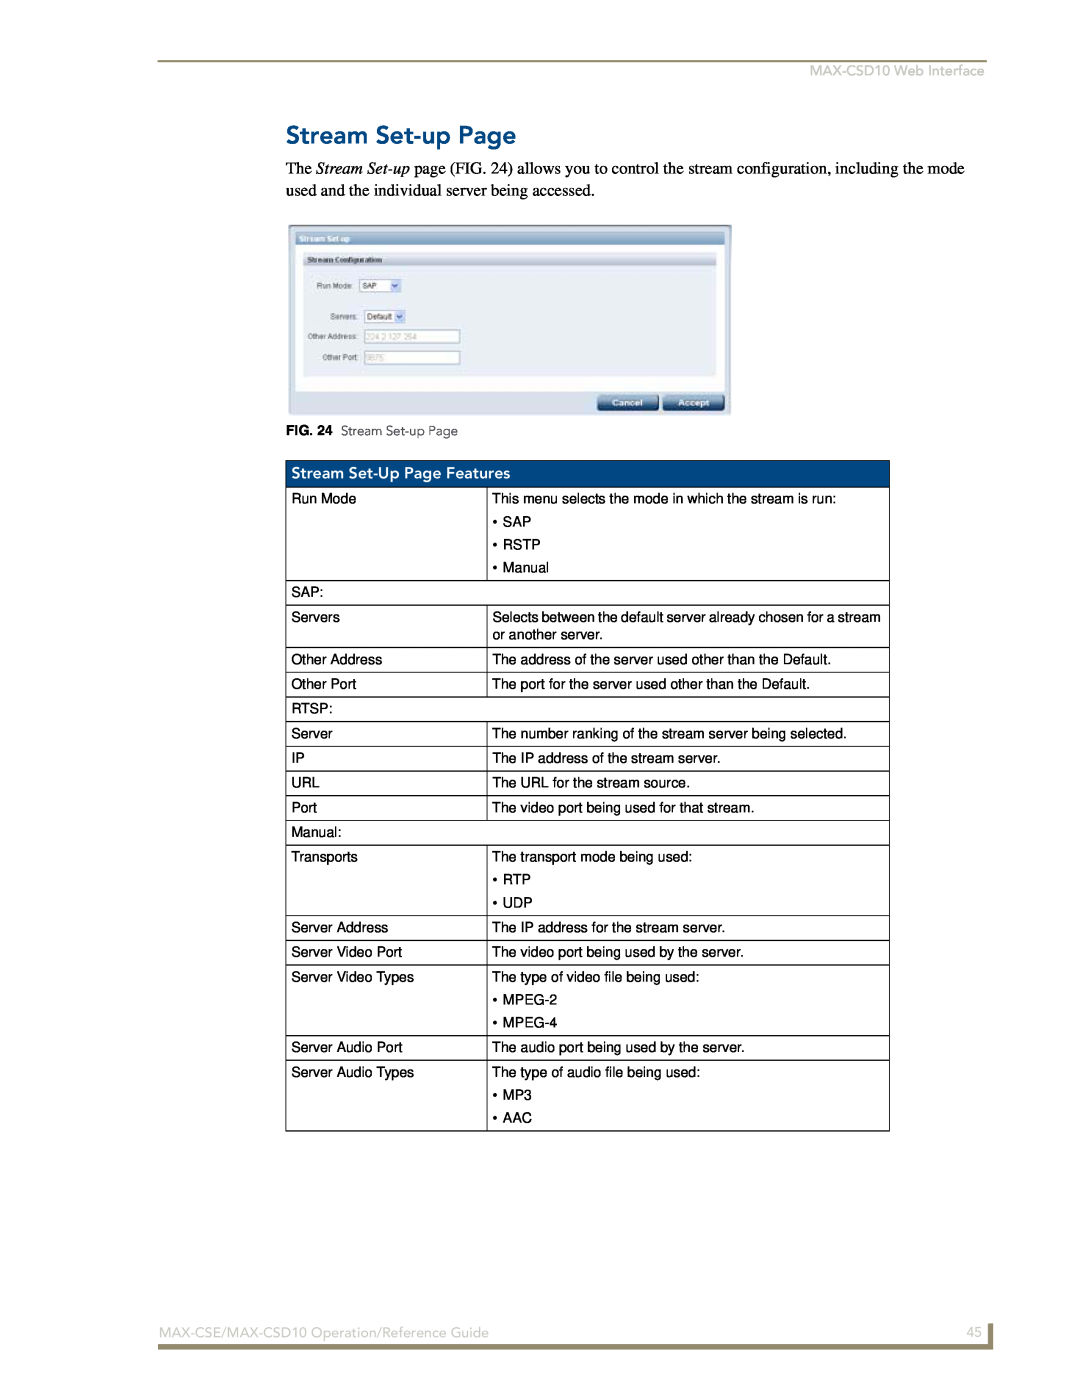 AMX Stream Set-upPage, Stream Set-UpPage Features, MAX-CSD10Web Interface, MAX-CSE/MAX-CSD10Operation/Reference Guide 